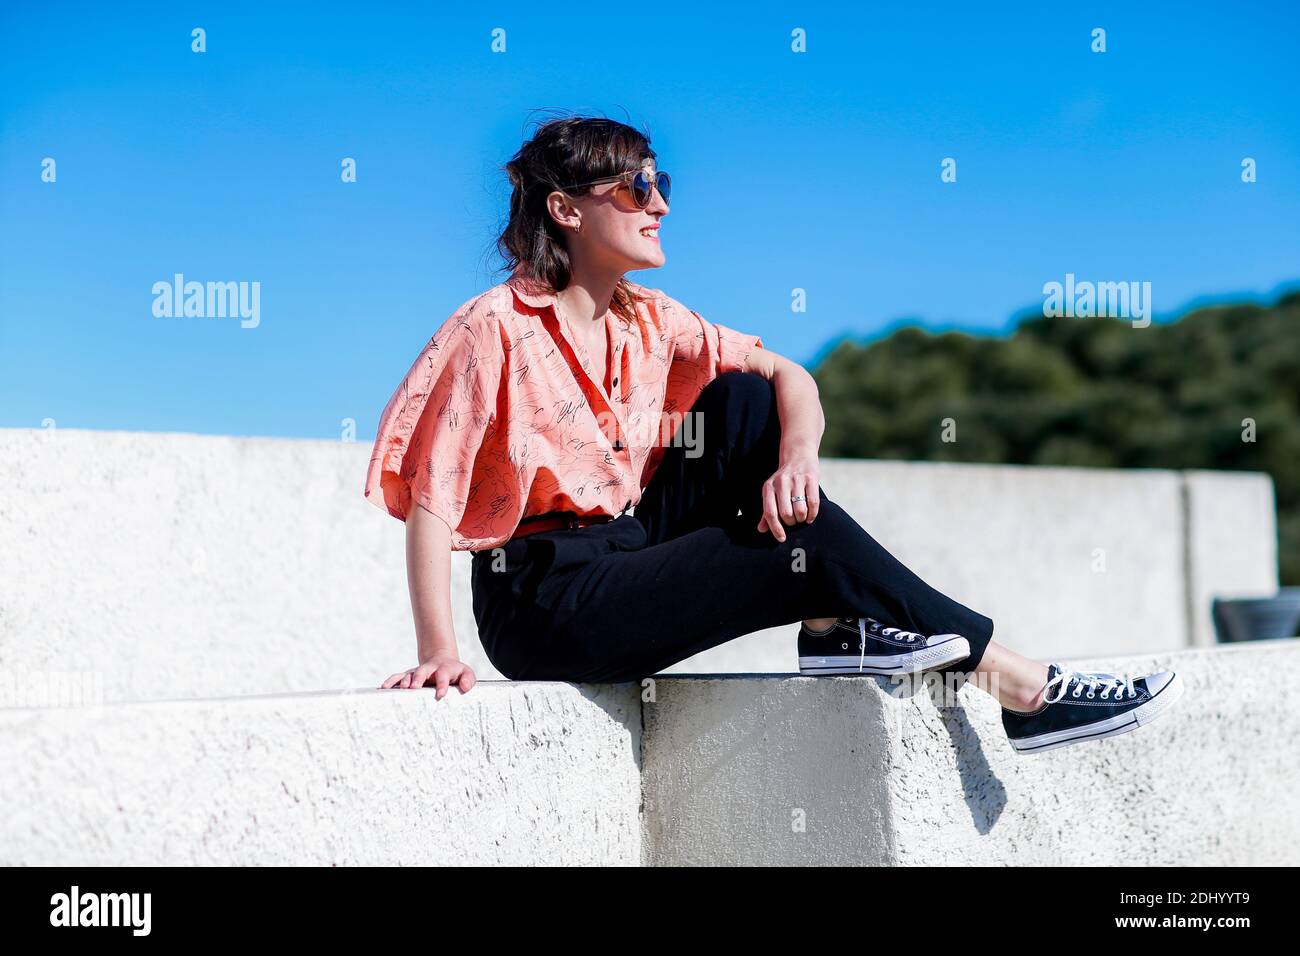 Street style, singer Juliette Armanet at 31st International festival of Fashion and Photography (31e Festival International de Mode et de Photographie de Hyeres) held at Villa Noailles, in Hyeres, France, on April 23rd, 2016. Photo by Marie-Paola Bertrand-Hillion/ABACAPRESS.COM Stock Photo